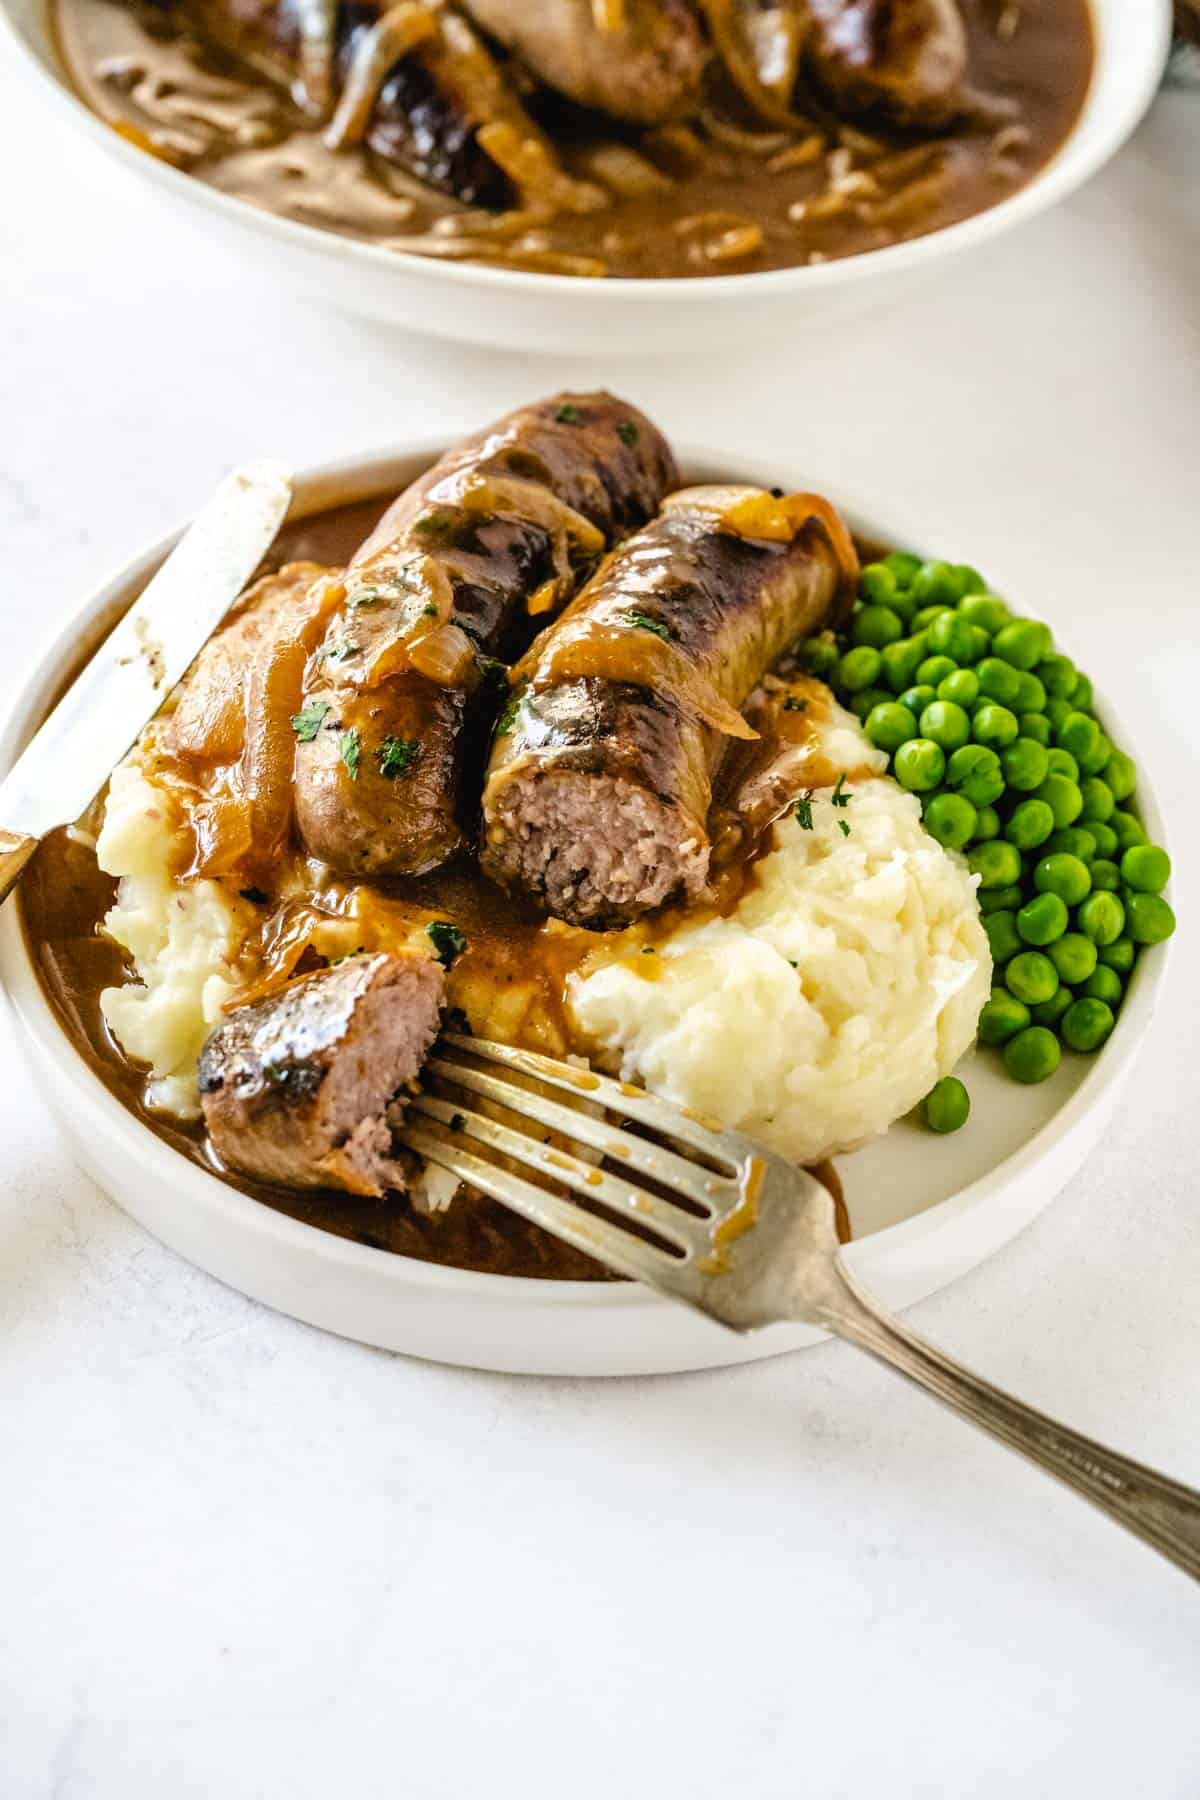 Bangers and mashed potatoes with gravy on a white plate with a fork and knife with one of the sausages is cut.